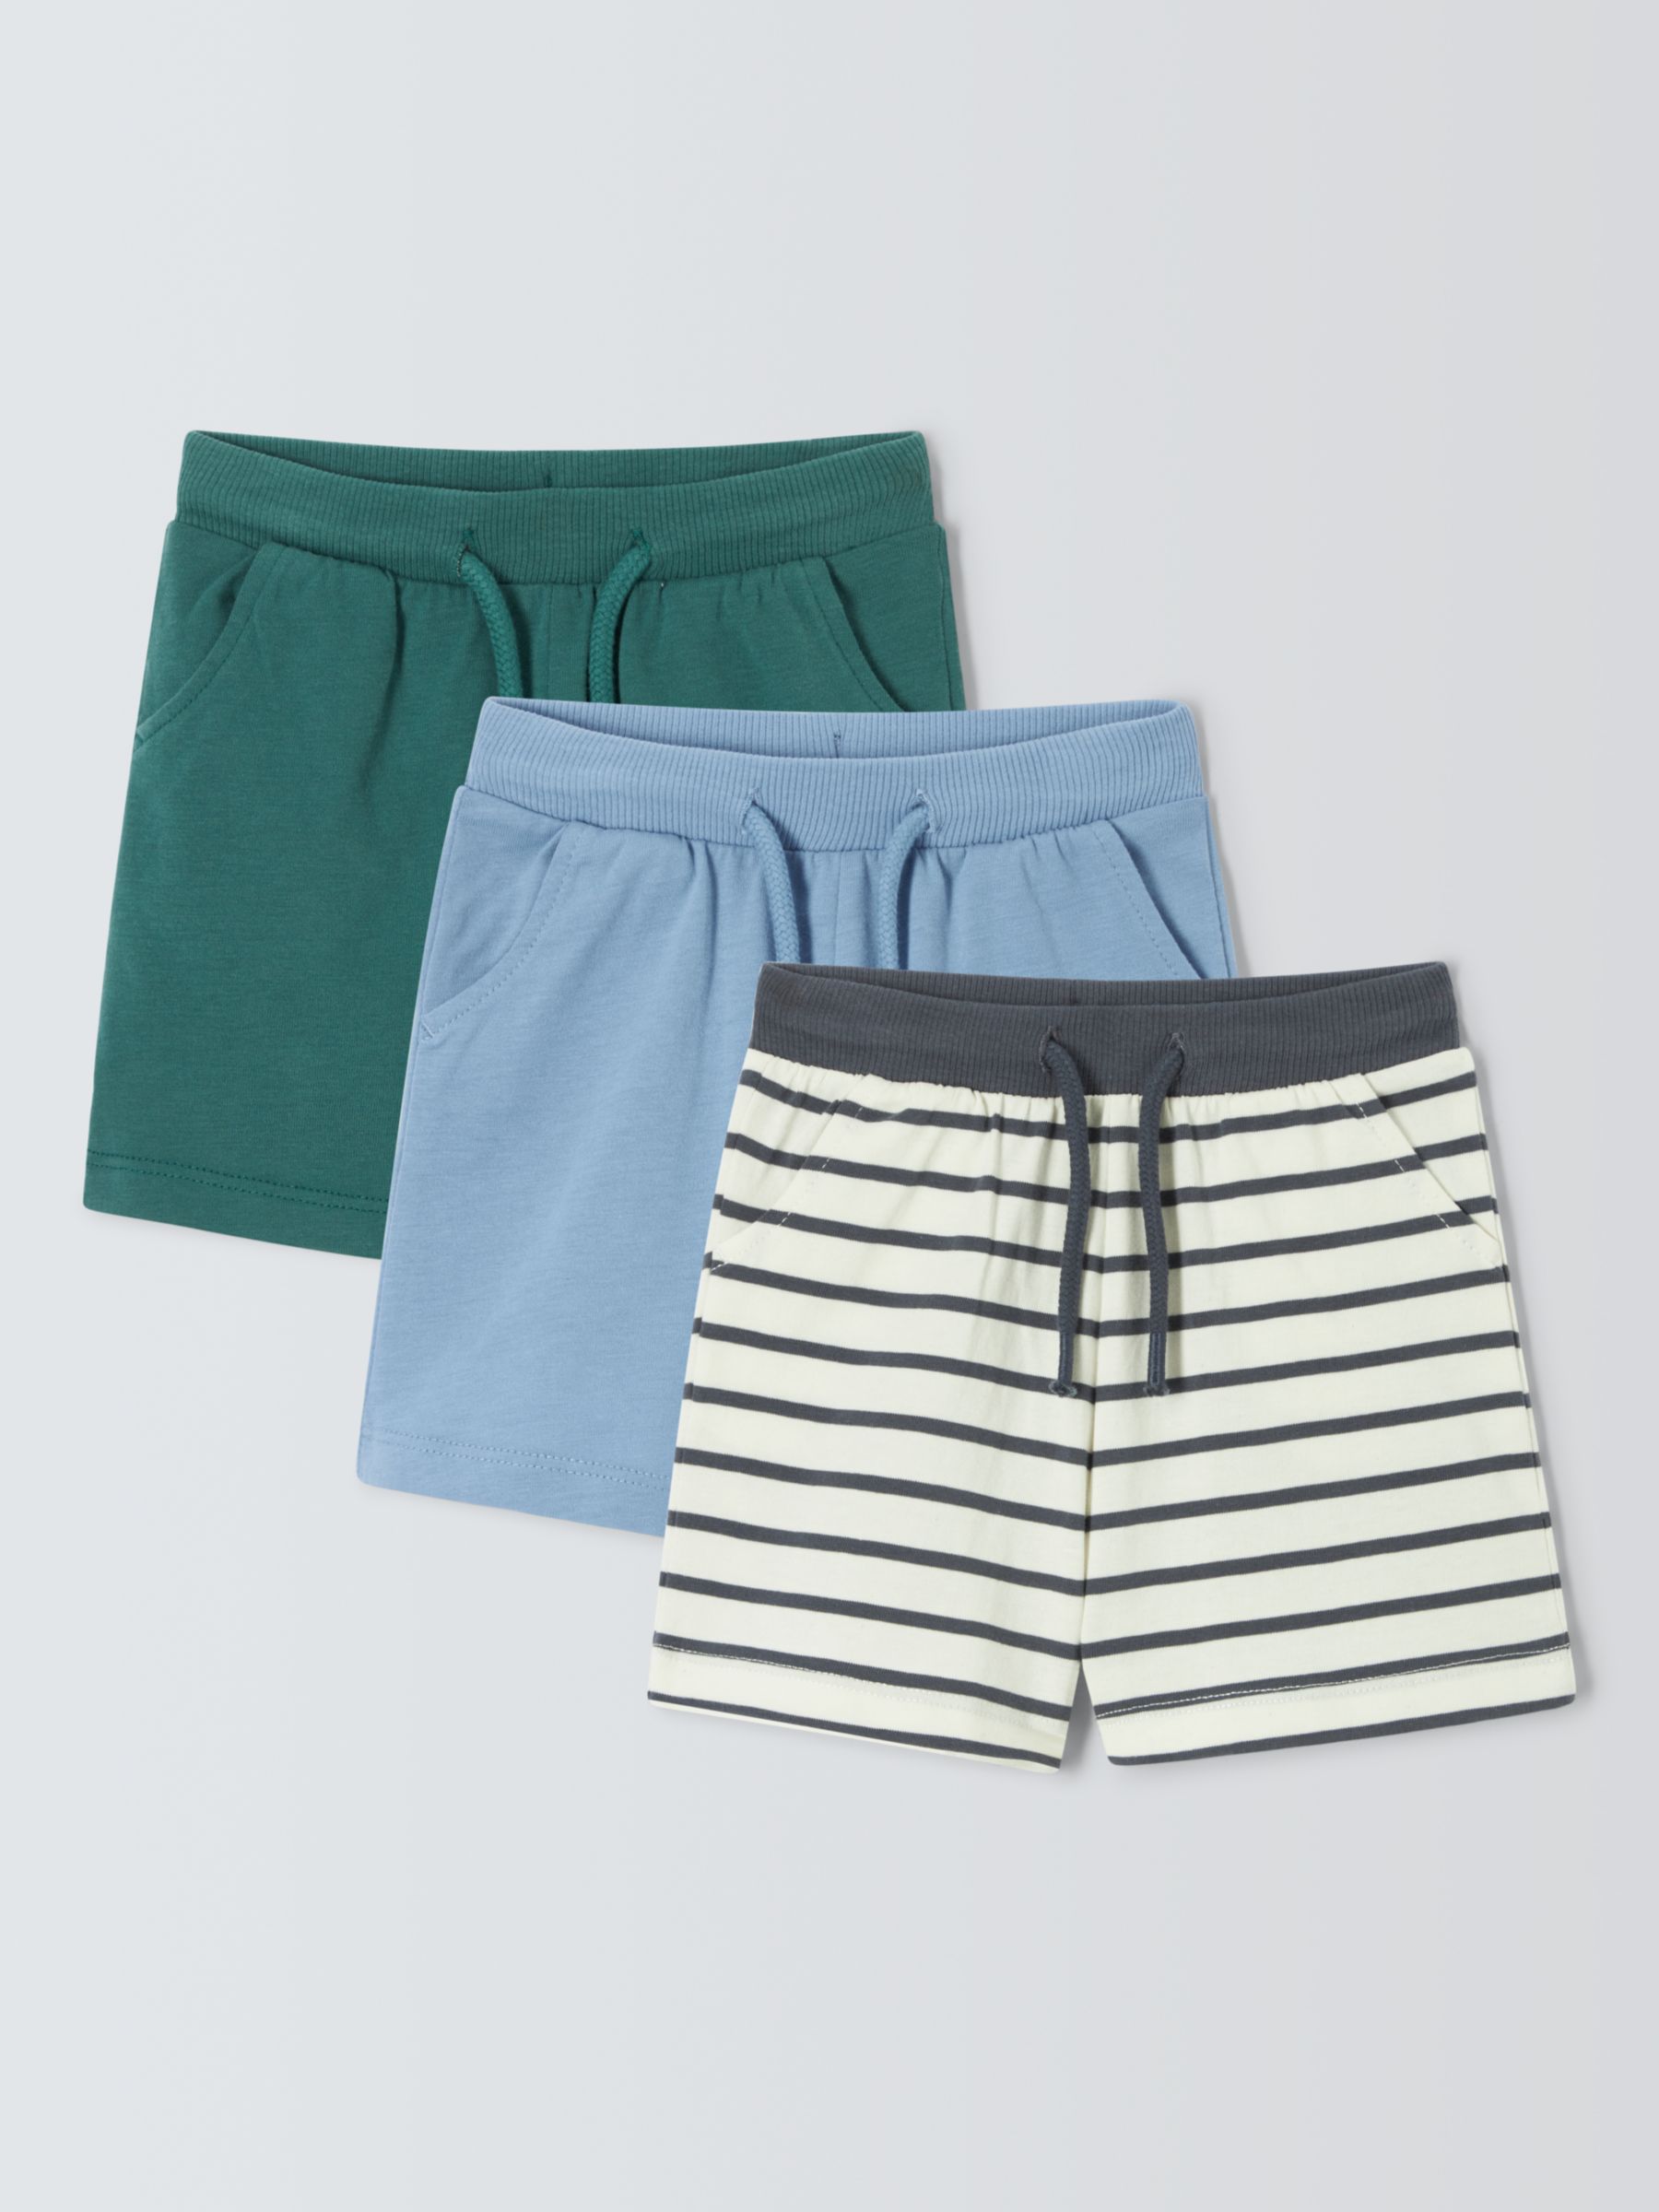 Buy John Lewis Baby Colourblock and Striped Shorts, Pack of 3, Multi Online at johnlewis.com